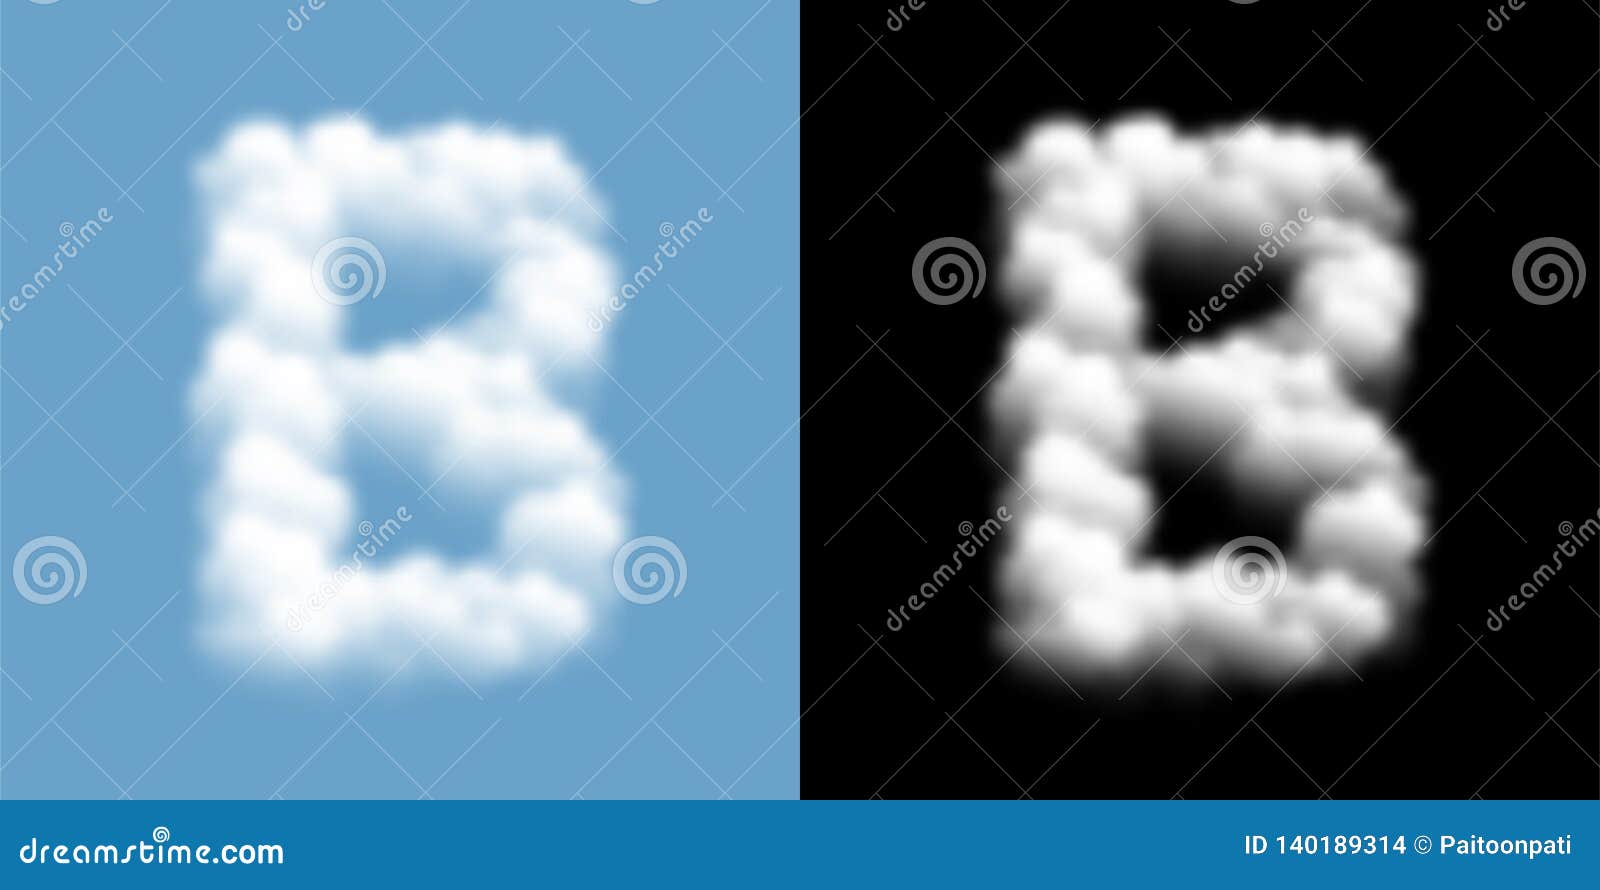 alphabet uppercase set letter b, cloud or smoke pattern, transparent   float on blue sky background, with